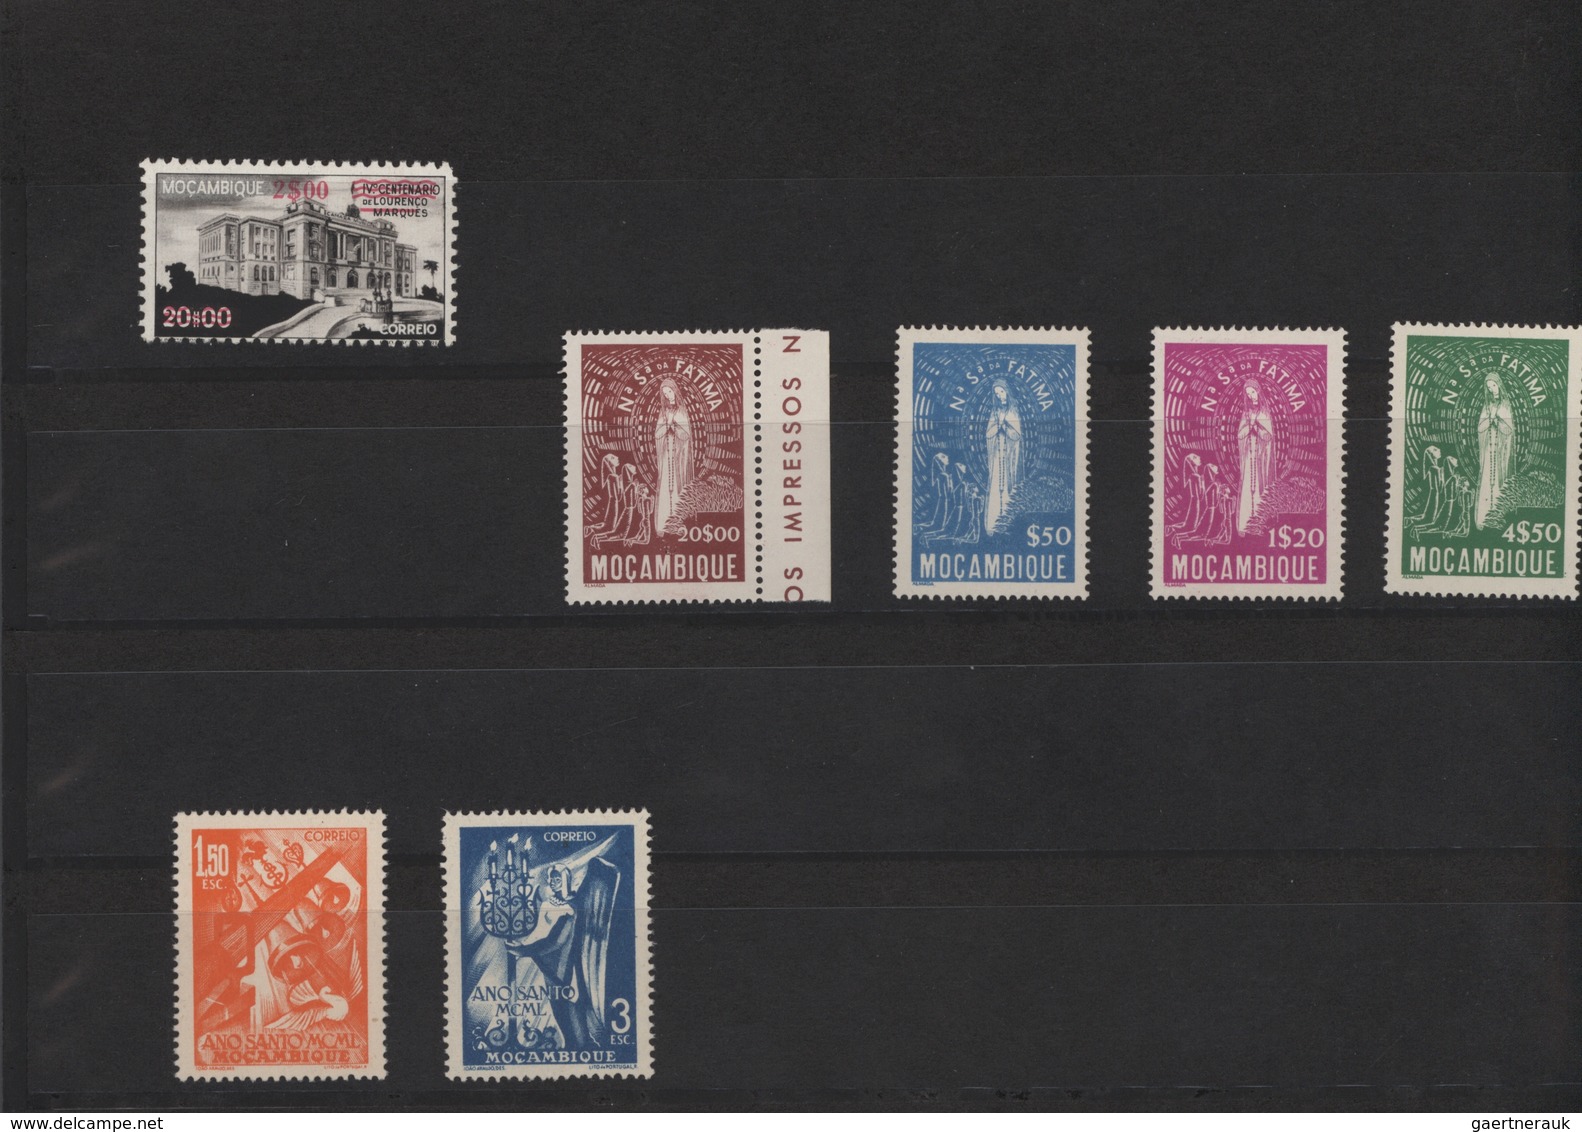 Kap Verde: 1938/1975, Beautiful Mint Never Hinged Collection Of The Portugues Colonial Stamps From T - Cap Vert